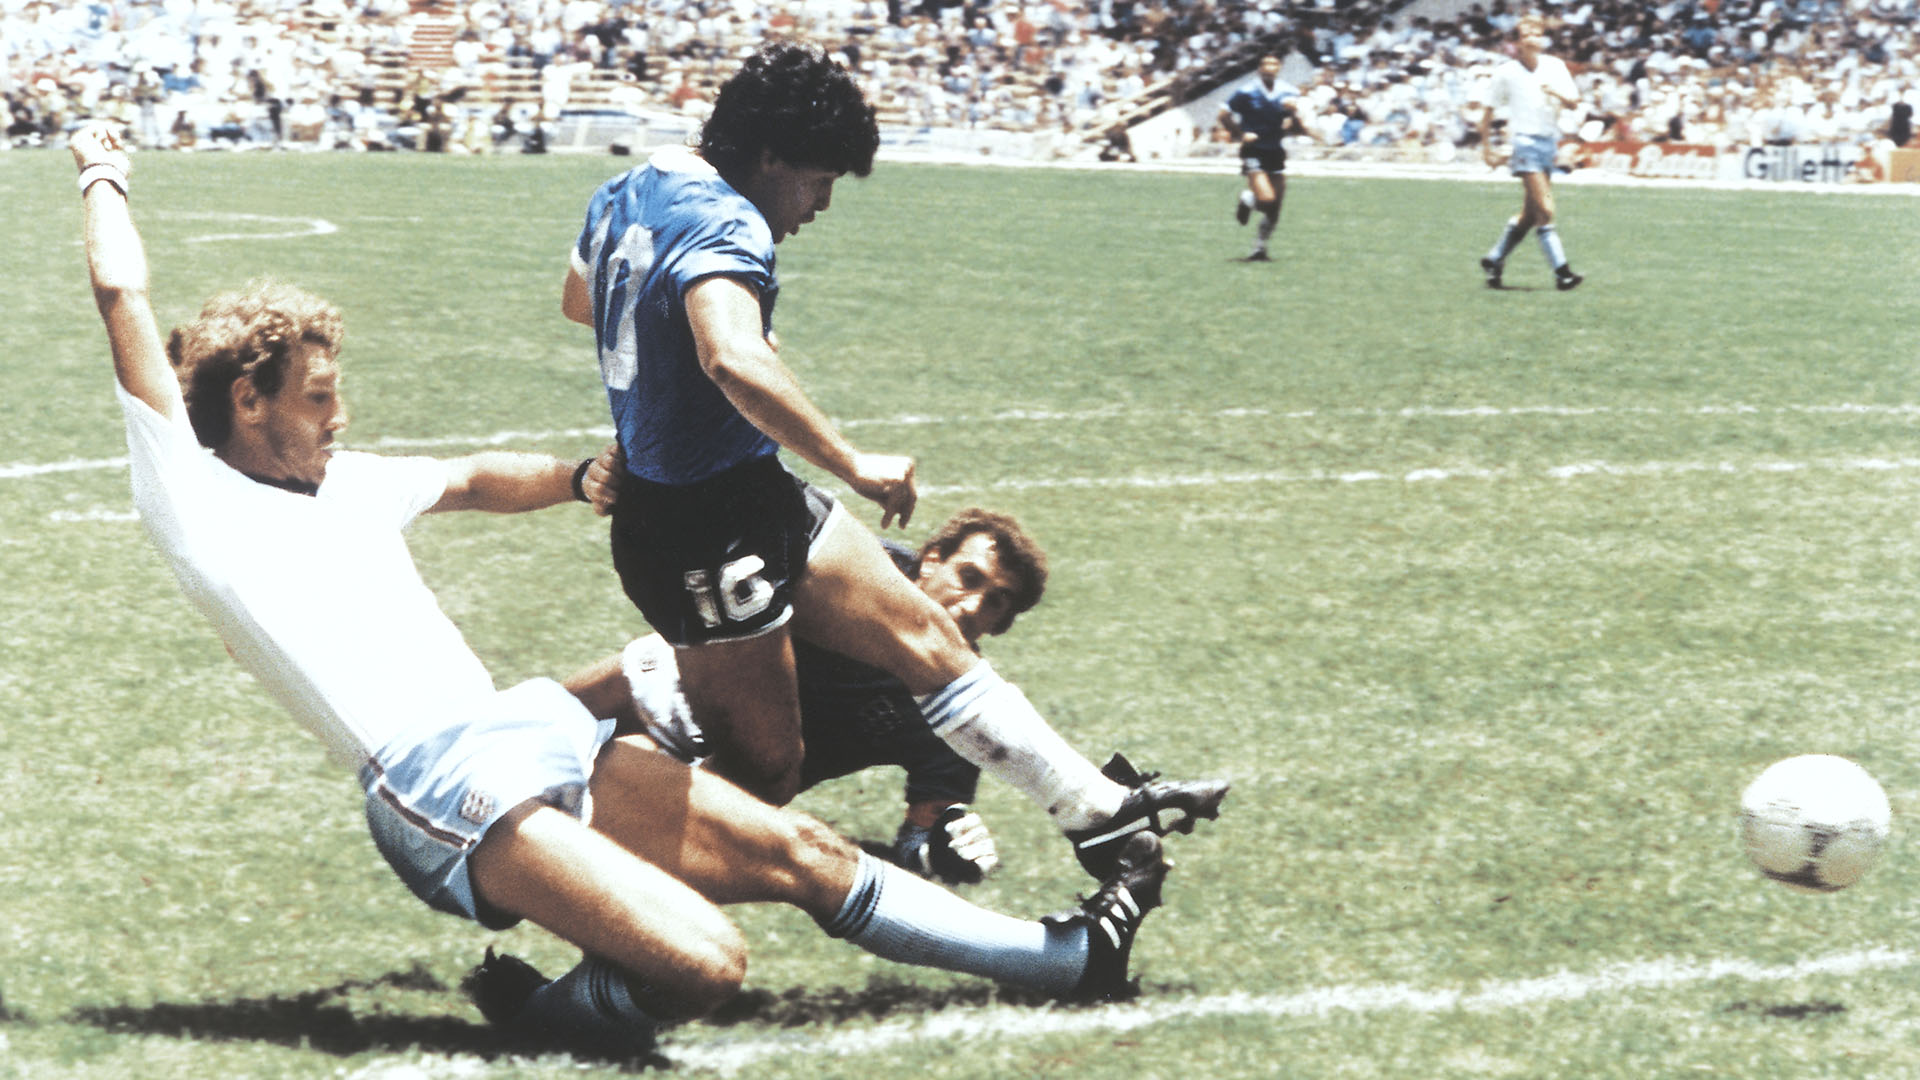 MEXICO CITY, MEXICO - JUNE 22: Diego Maradona of Argentina kicks the ball to score the second goal of his team during a 1986 FIFA World Cup Quarter Final match between Argentina and England at Azteca Stadium on June 22, 1986 in Mexico City, Mexico. (Photo by Archivo El Grafico/Getty Images)